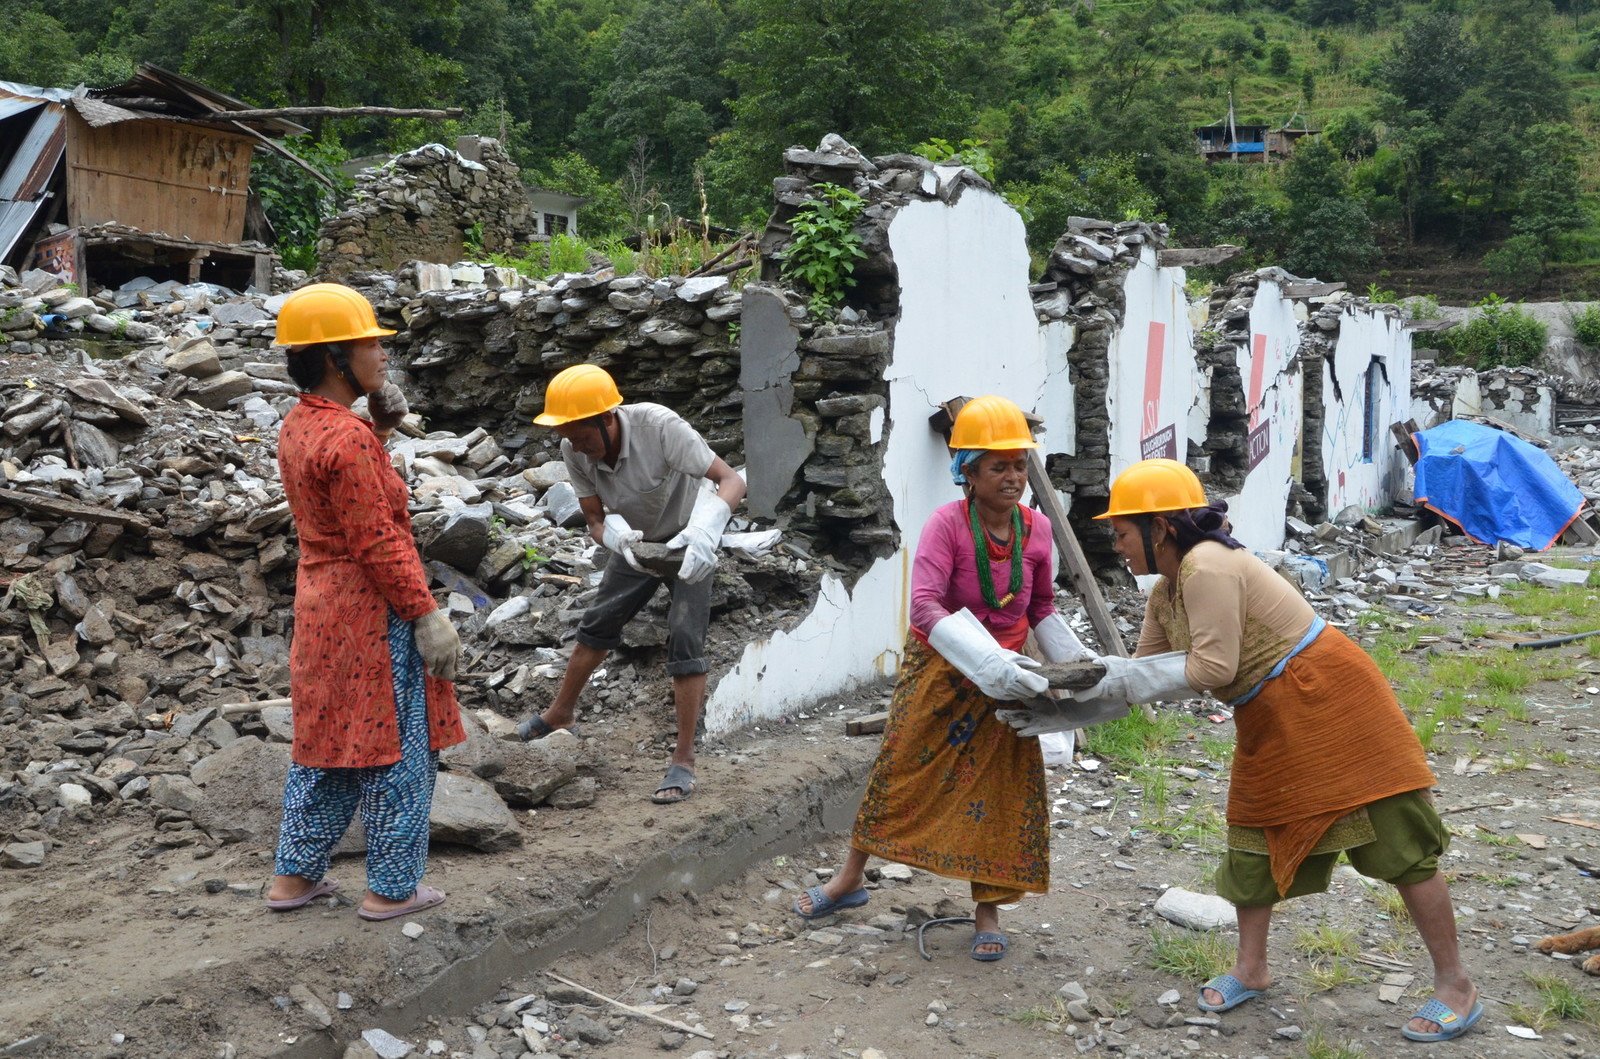 Dil Maya Sunar (pictured second from right) helped clear the debris from a collapsed school block. “We generally work on the farm but this time, the earthquake swept away our land where we would grow corn, and I’ve nothing else to do,” said Dil Maya. She worked for 15 days under Oxfam’s Cash for Work Programme. (Photo: Rakesh Tuladhar/Oxfam)